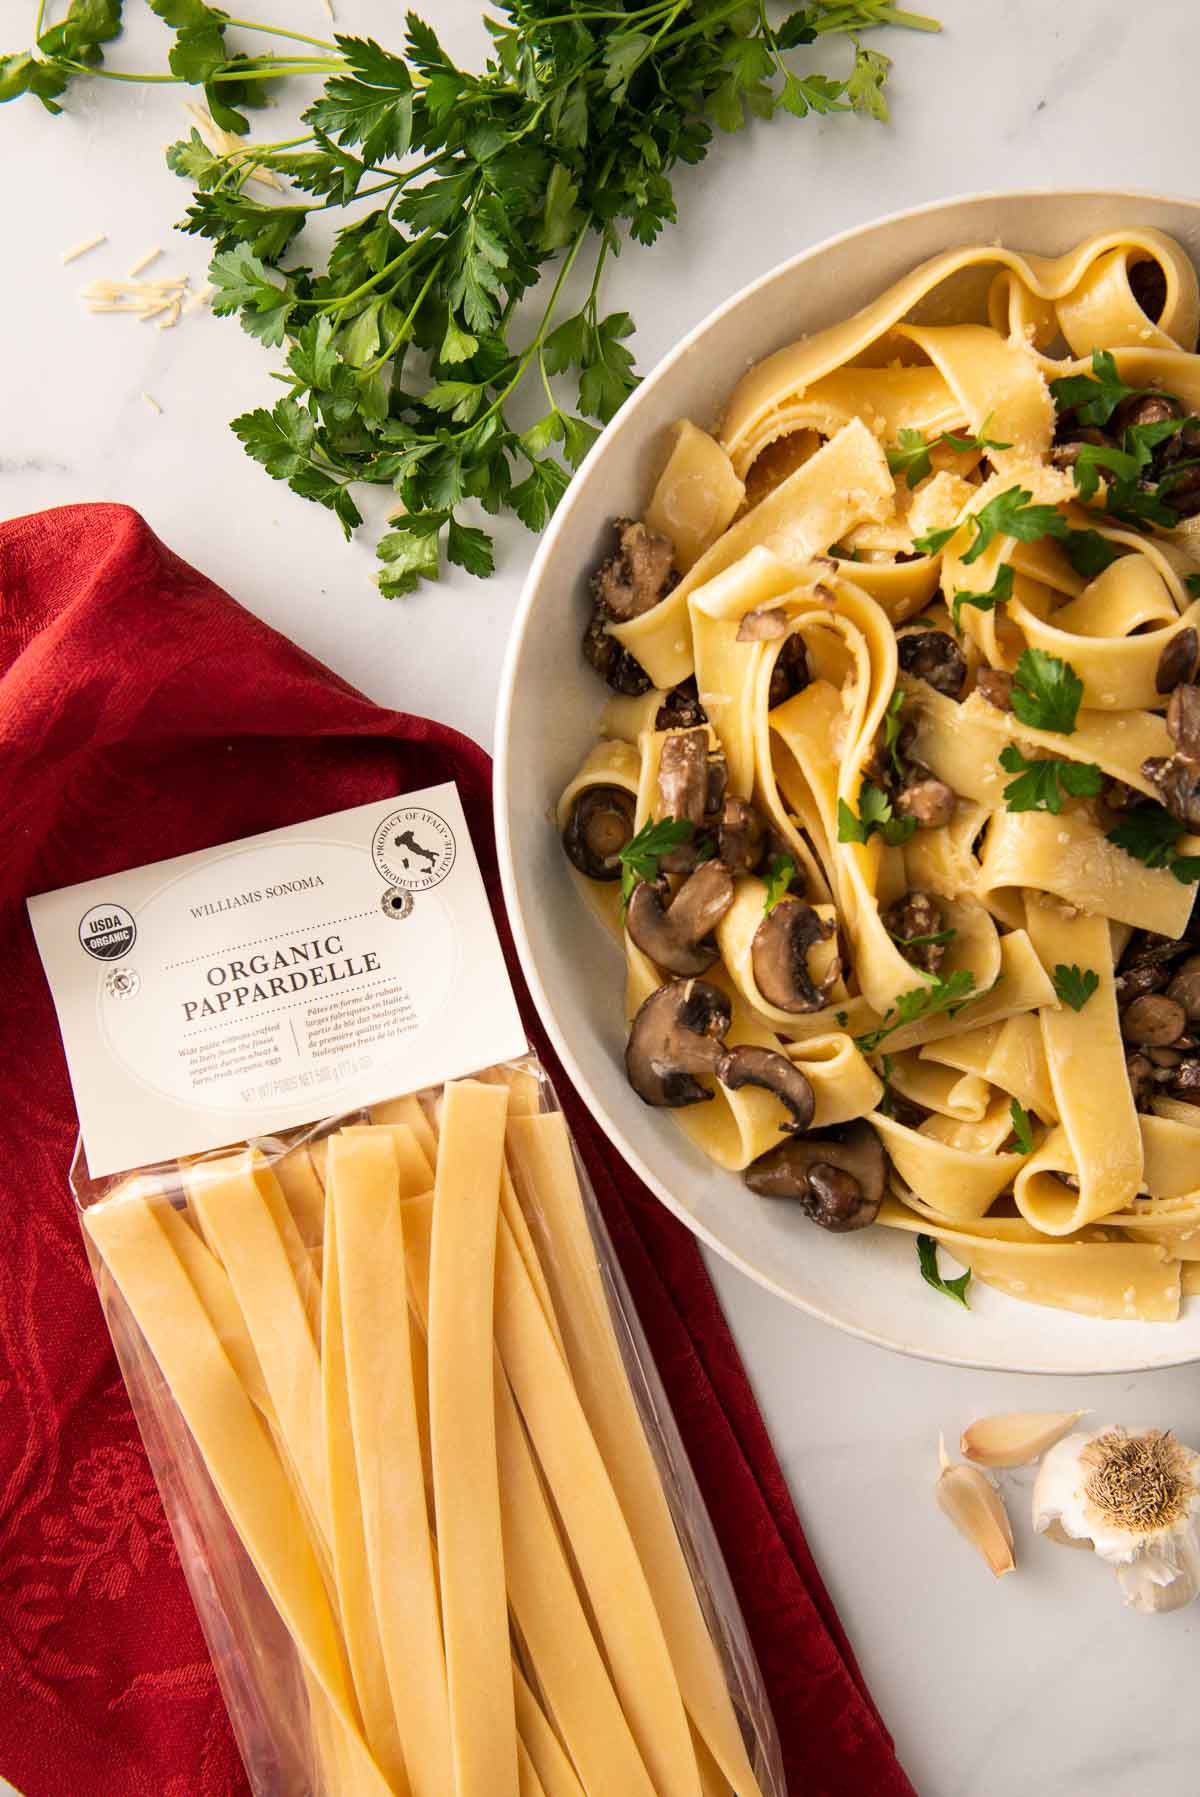 Williams Sonoma's organic pappardelle pasta next to a bowl of cooked creamy mushroom pasta.